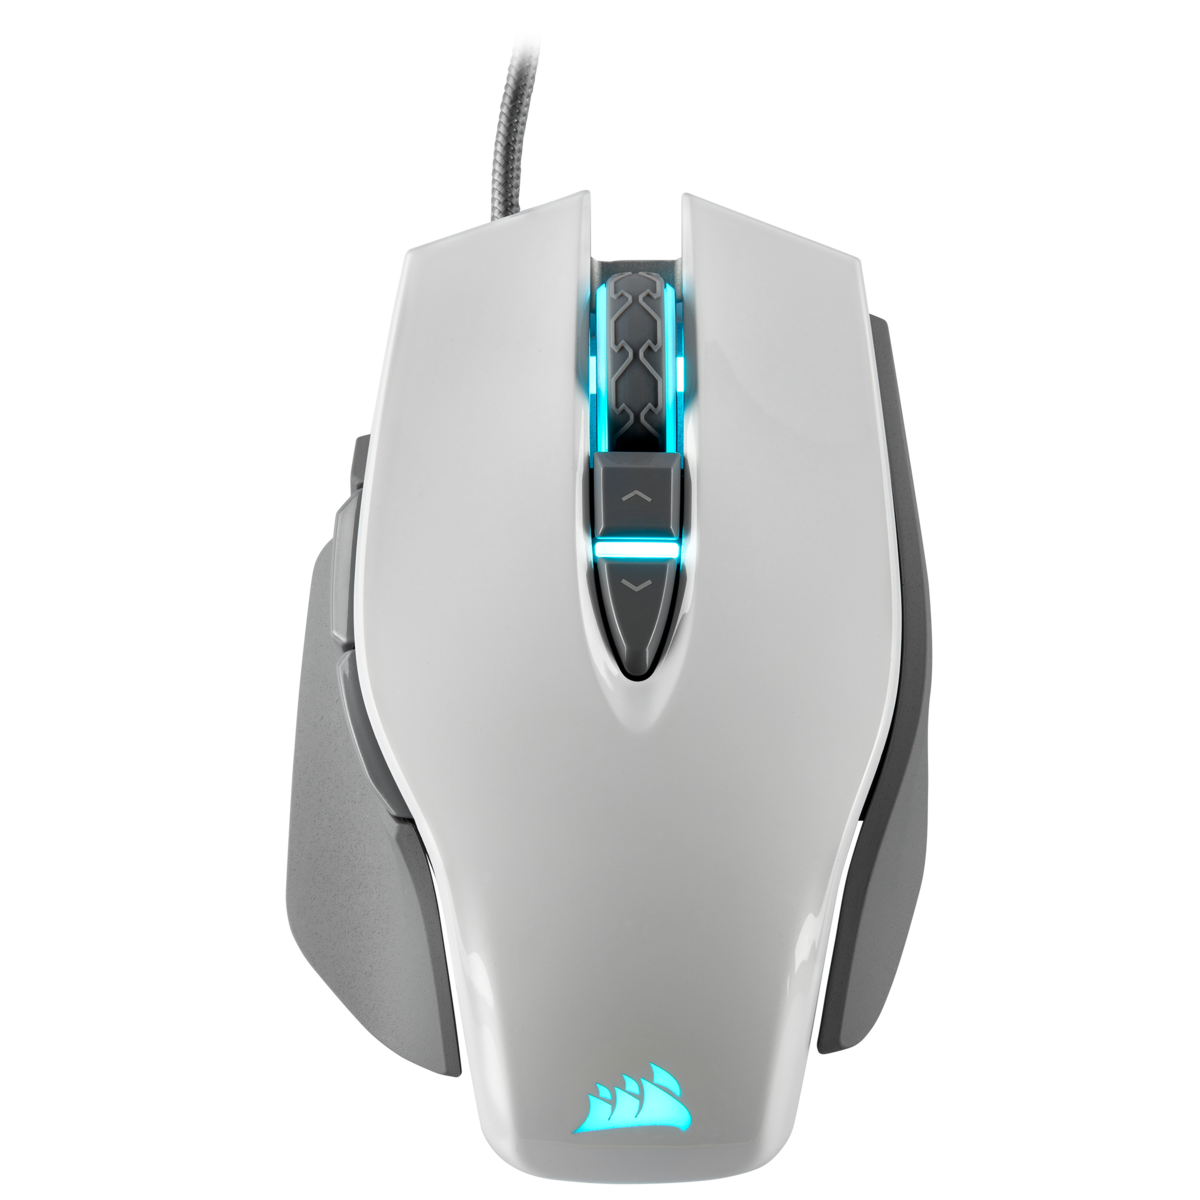 Corsair M65 RGB Elite tunable gaming mouse — Elite features at a competitive price NotebookCheck.net News